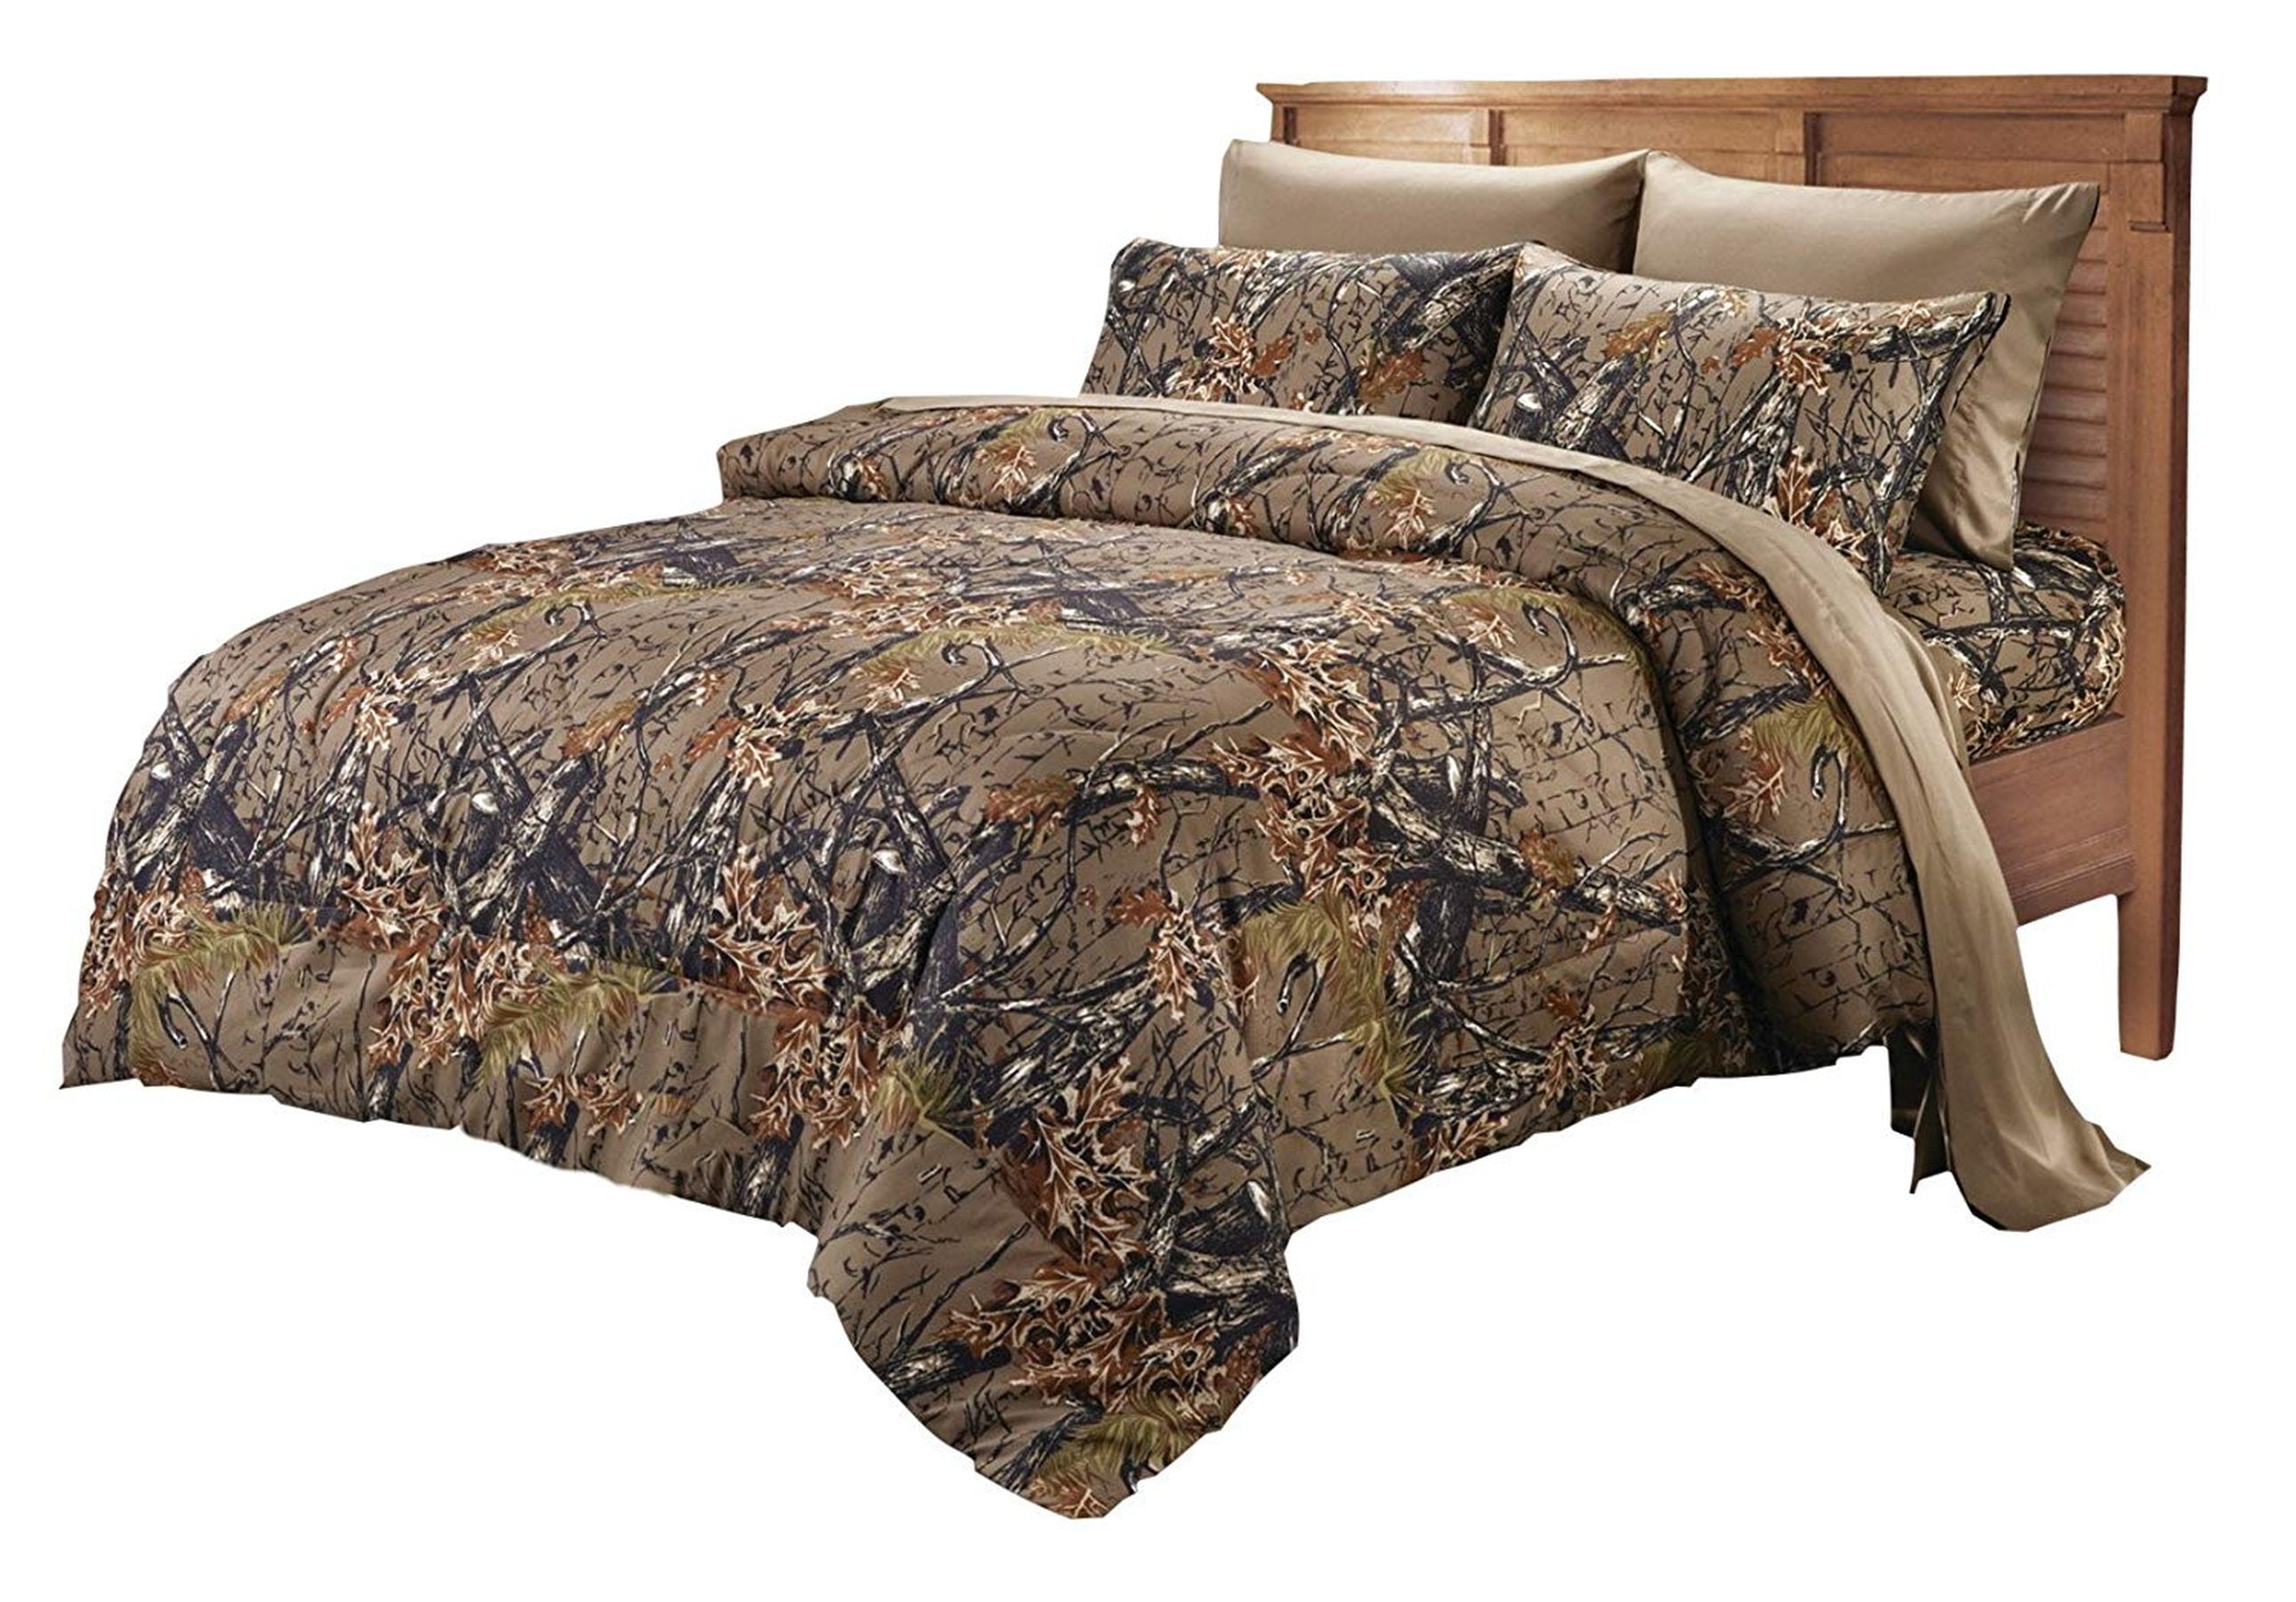 CAMO KING SIZE GRAY 7 PC COMFORTER REVERSIBLE WITH SHEETS PILLOWCASES WOODS 